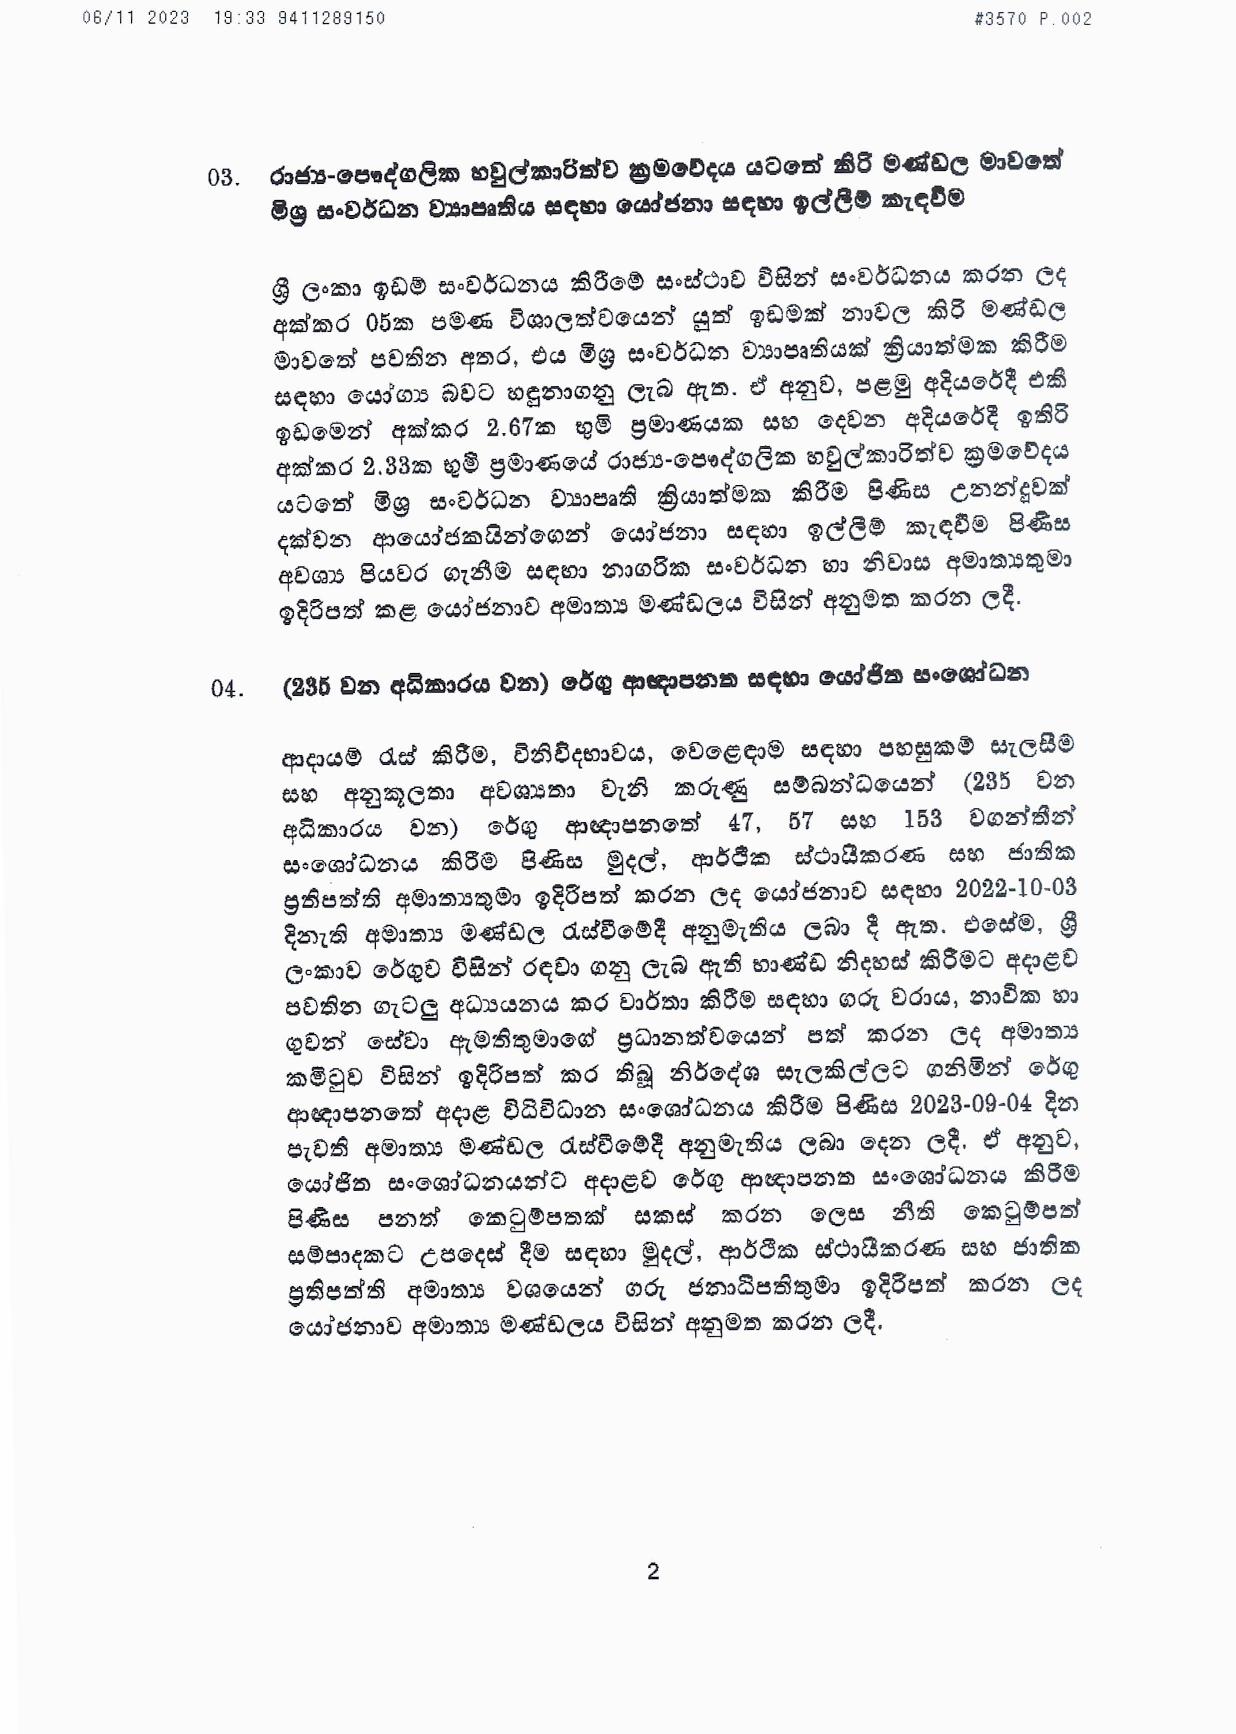 Cabinet Decision on 06.11.2023 page 002